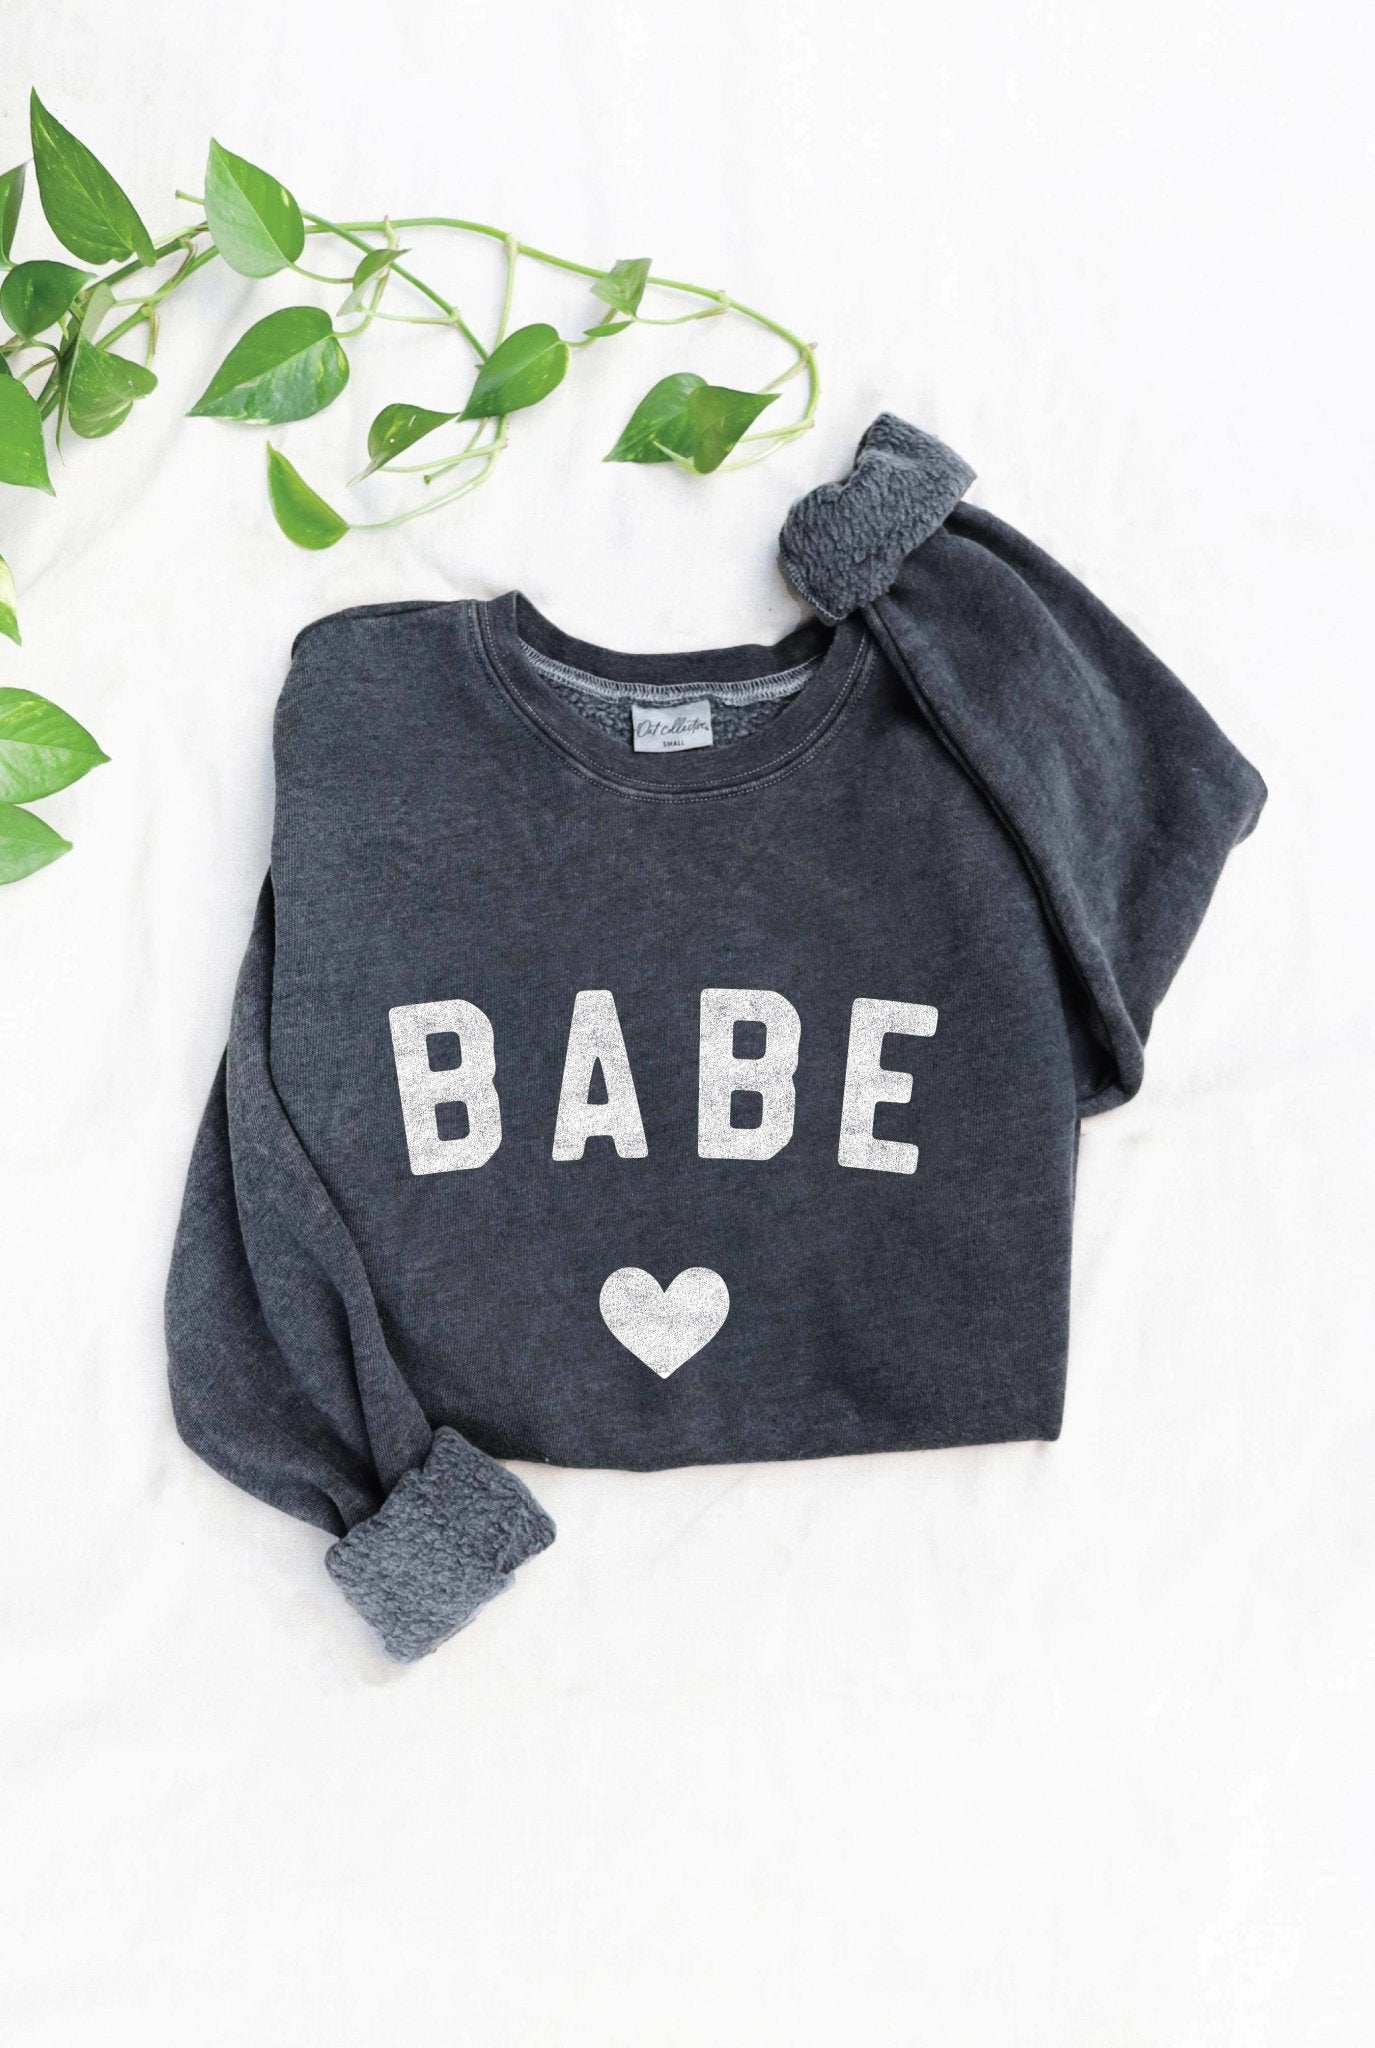 The Babe Sweatshirt - Oat Collective - the friday collective